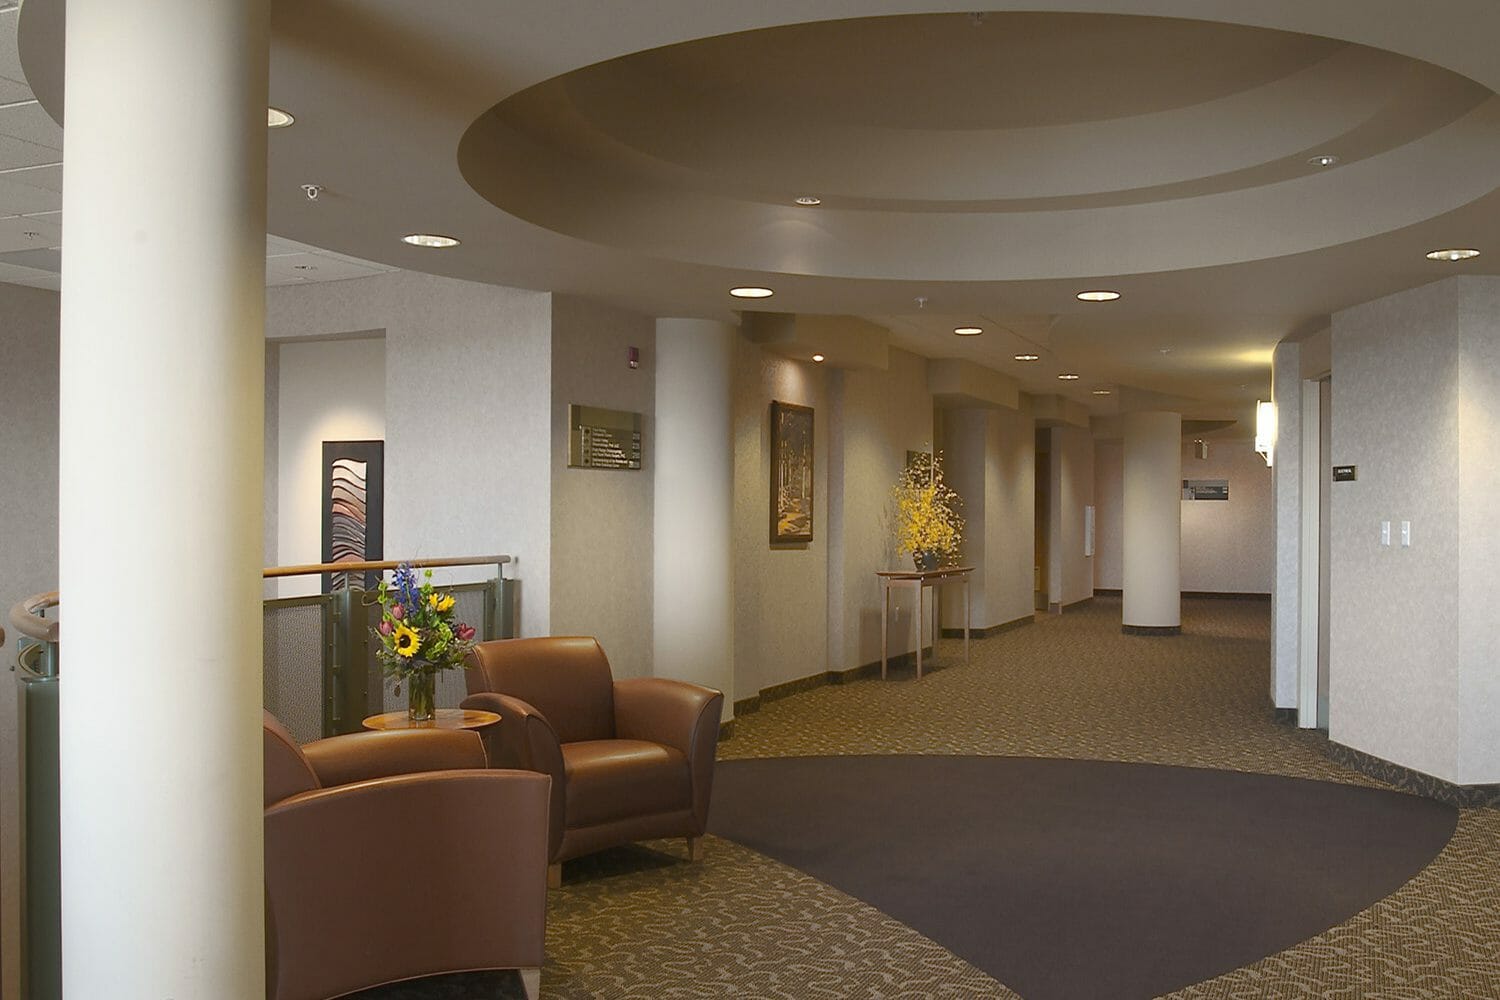 upper level open area, leather chairs, hallway to medical offices